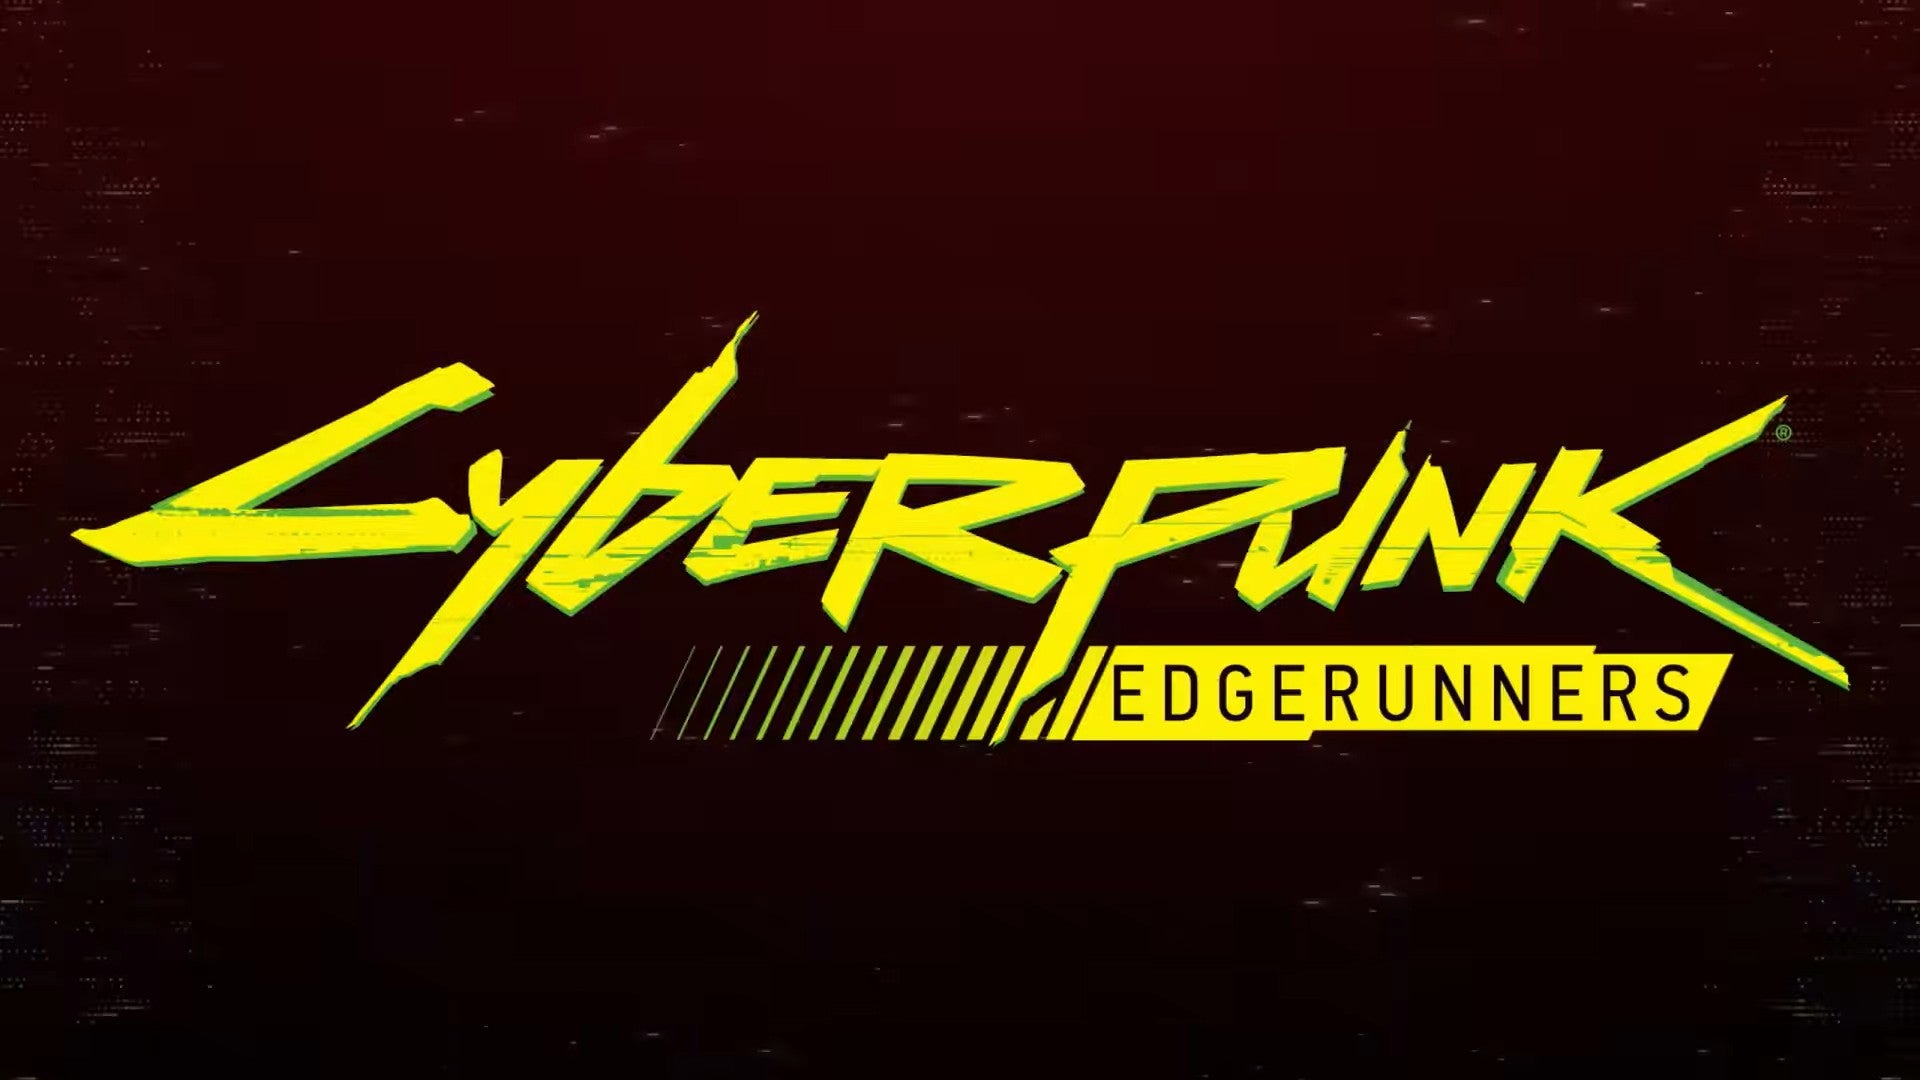 Image for CD Projekt's Cyberpunk anime Edgerunners gets new trailer and footage